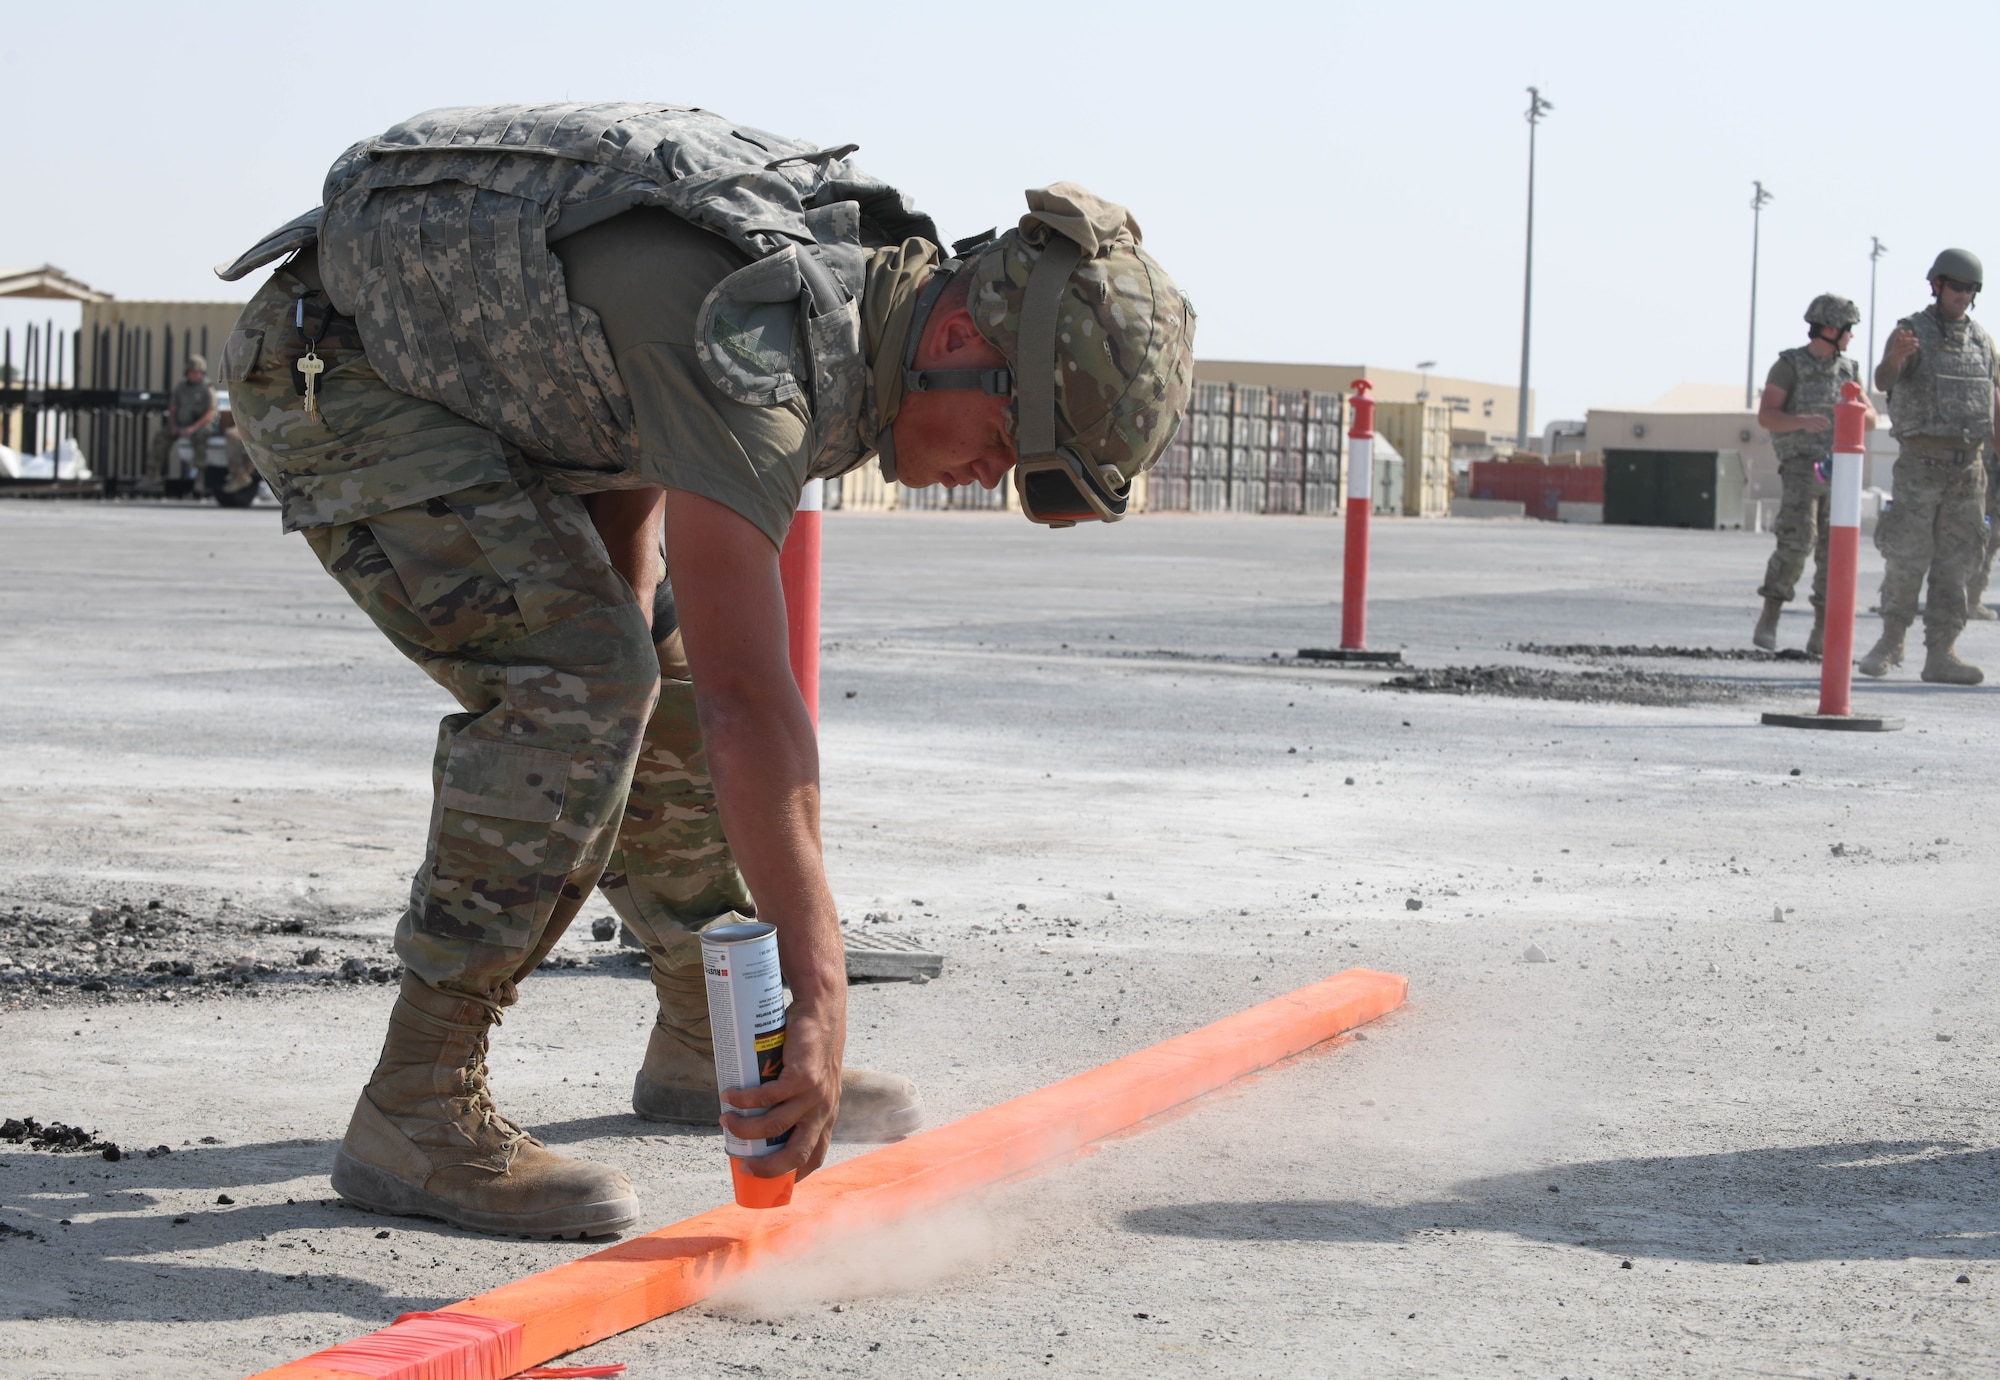 Airman 1st Class Cole Weber, a pavement construction equipment apprentice assigned to the 379th Expeditionary Civil Engineer Squadron, uses a piece of wood to spray paint boundaries around a crater during rapid airfield damage repair training Nov. 18, 2020, at Al Udeid Air Base, Qatar. 379th ECES Airmen came together to conduct RADR training, which prepares them to make expeditious repairs to an airfield should it be attacked, bringing it back to operational status. (U.S. Air Force photo by Staff Sgt. Kayla White)